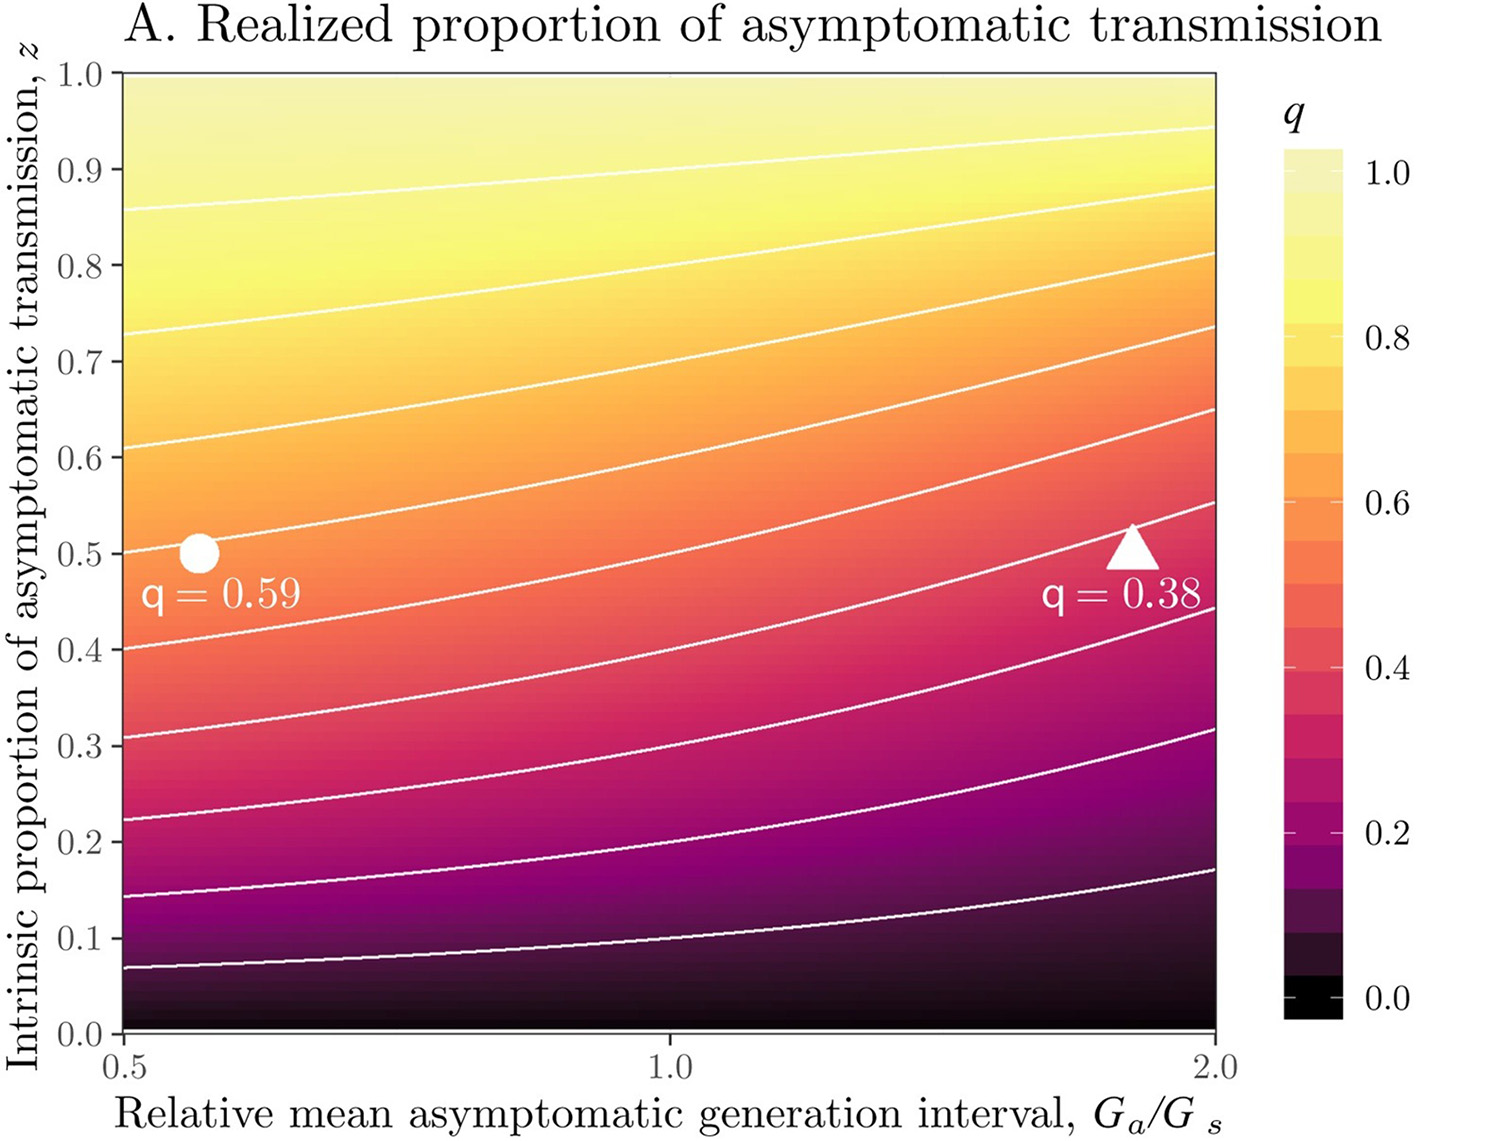 Chart shows the realized proportion of asymptomatic transmission of the coronavirus.